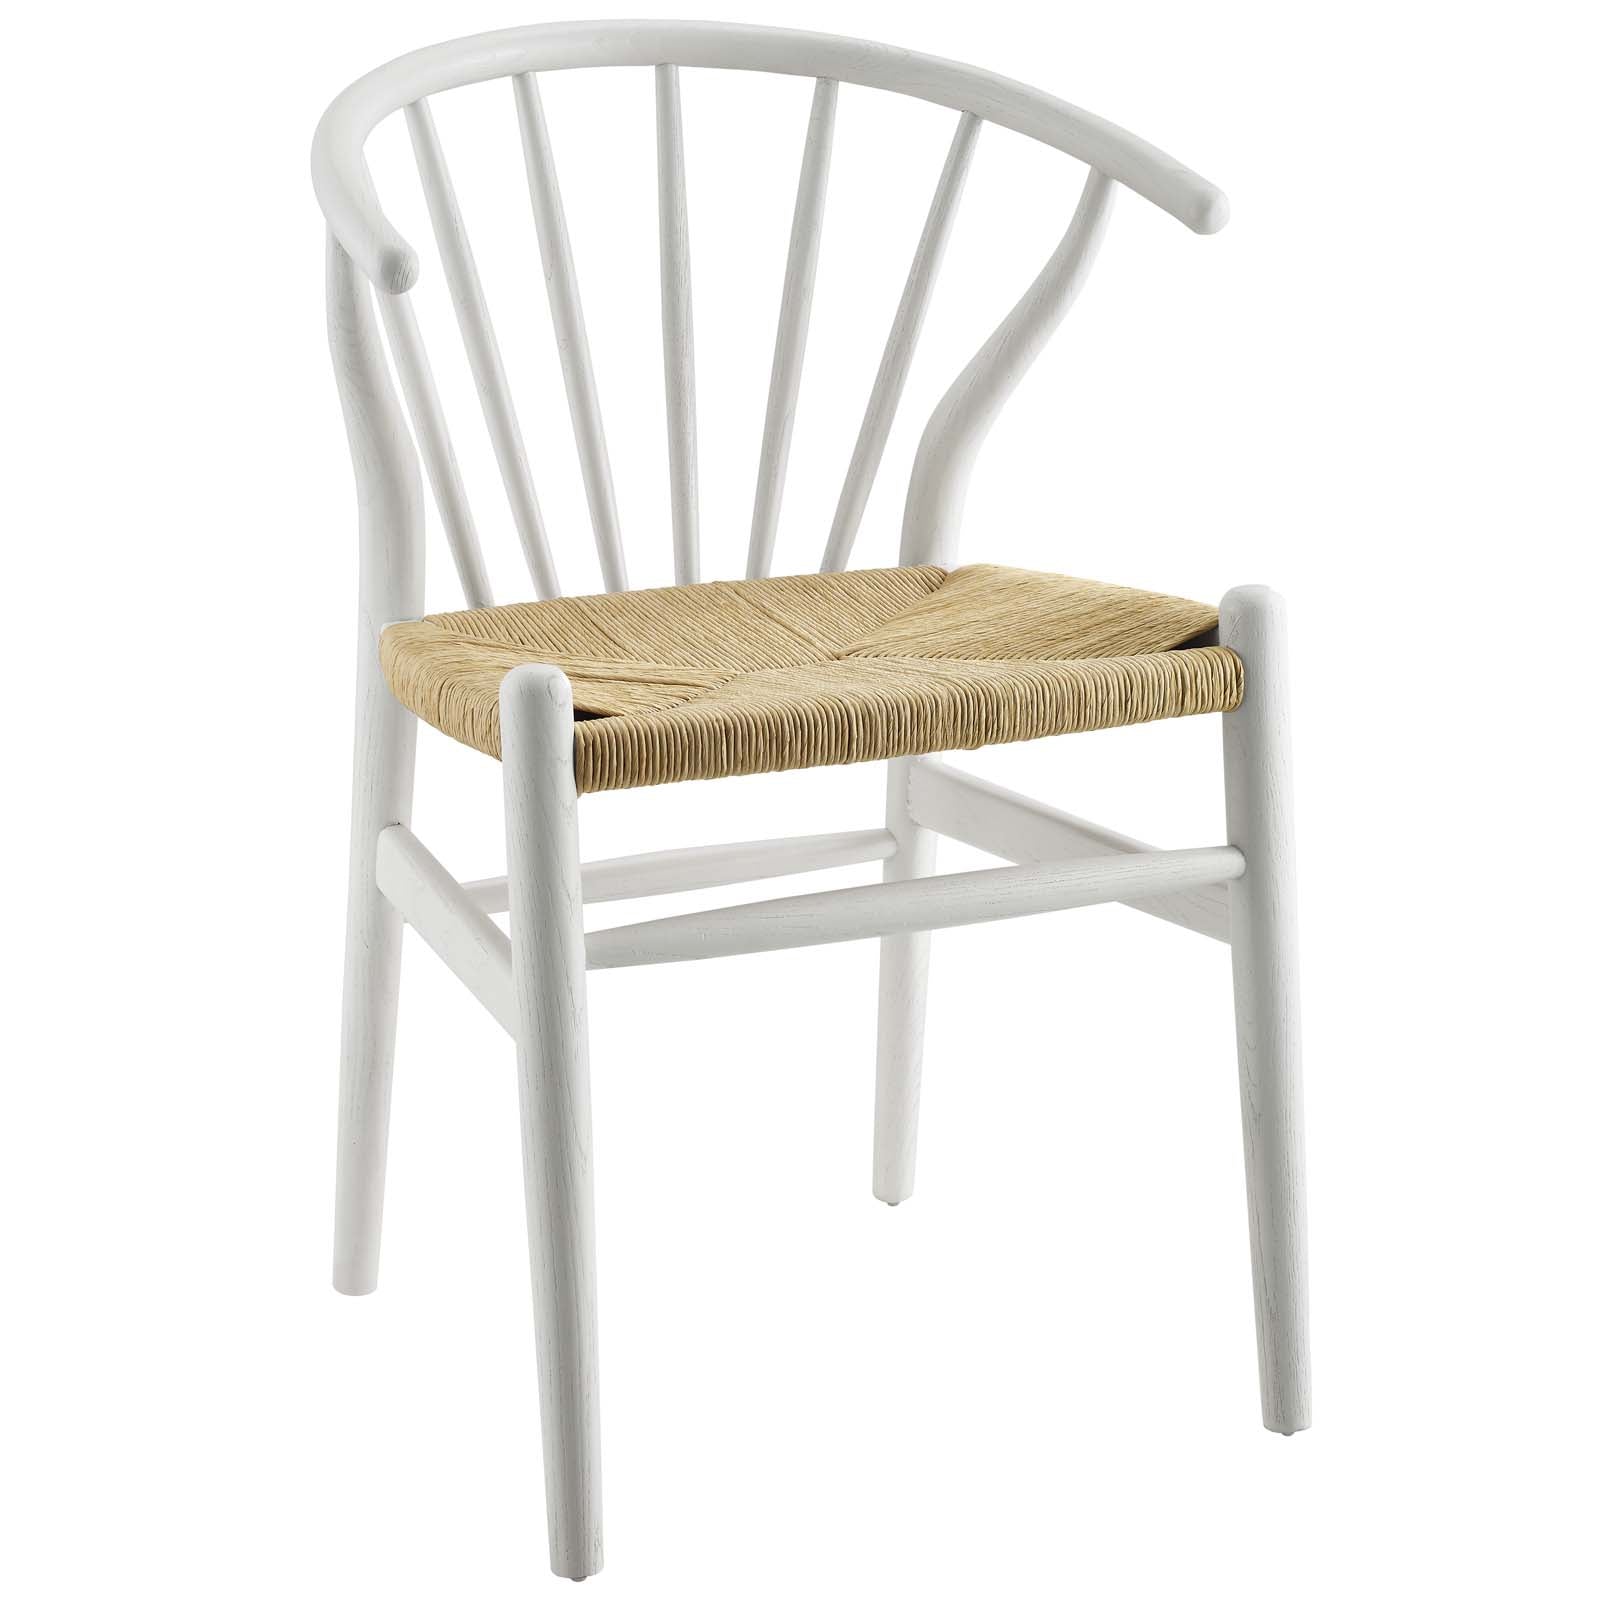 Flourish Spindle Wood Dining Side Chair - East Shore Modern Home Furnishings